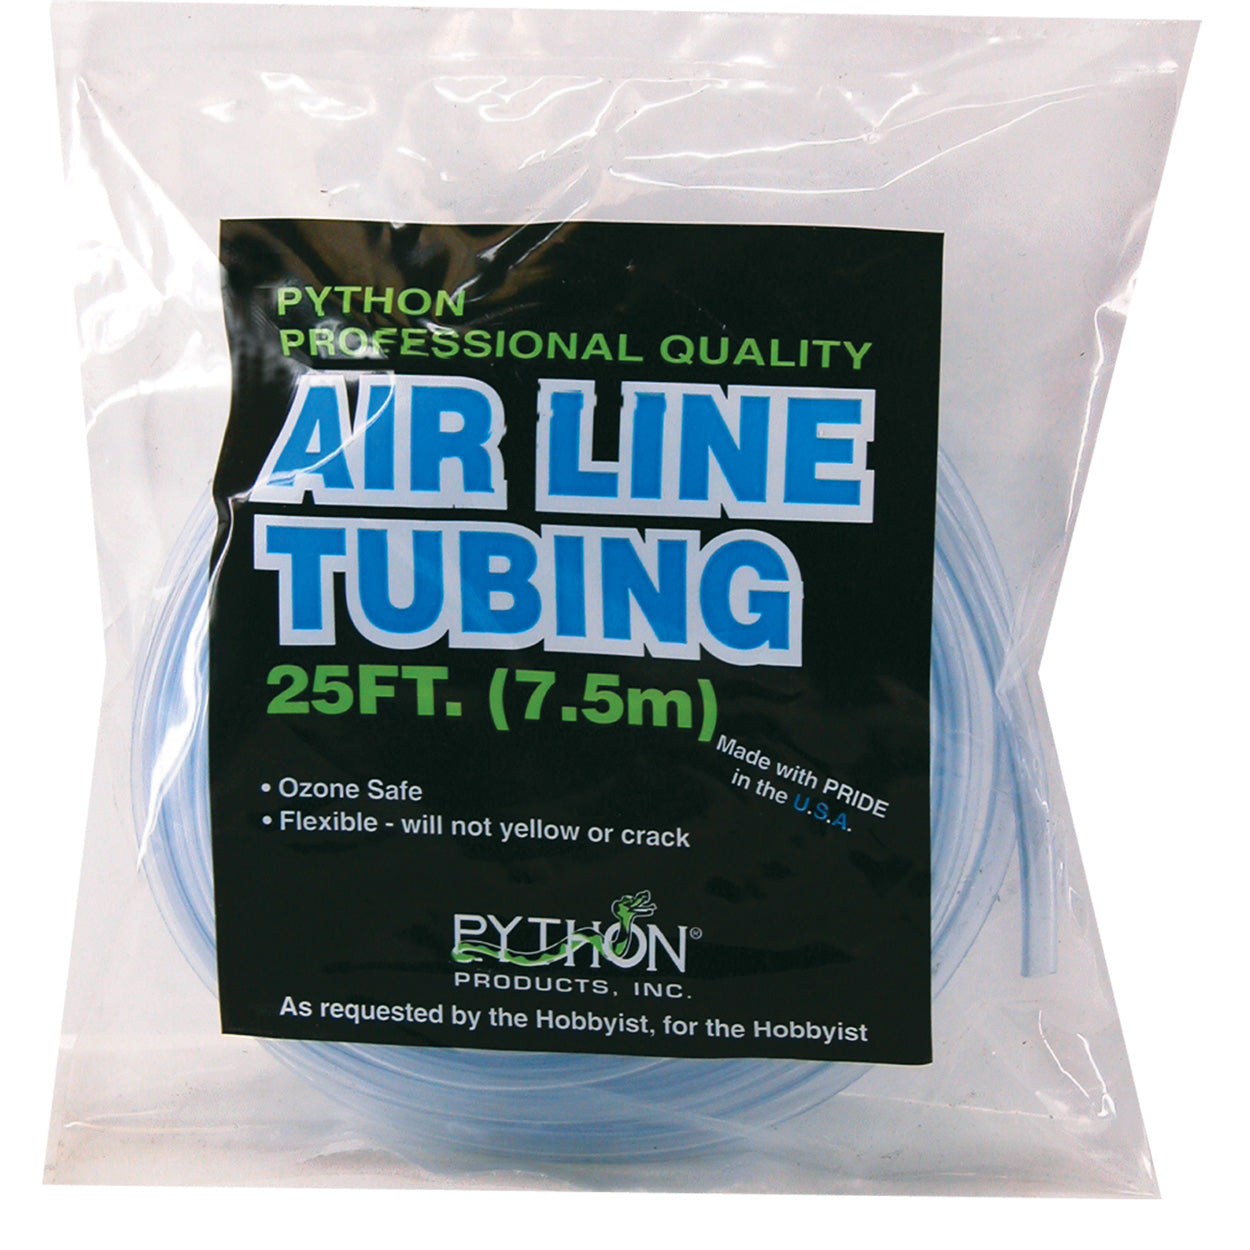 Python Airline Tubing 25Ft